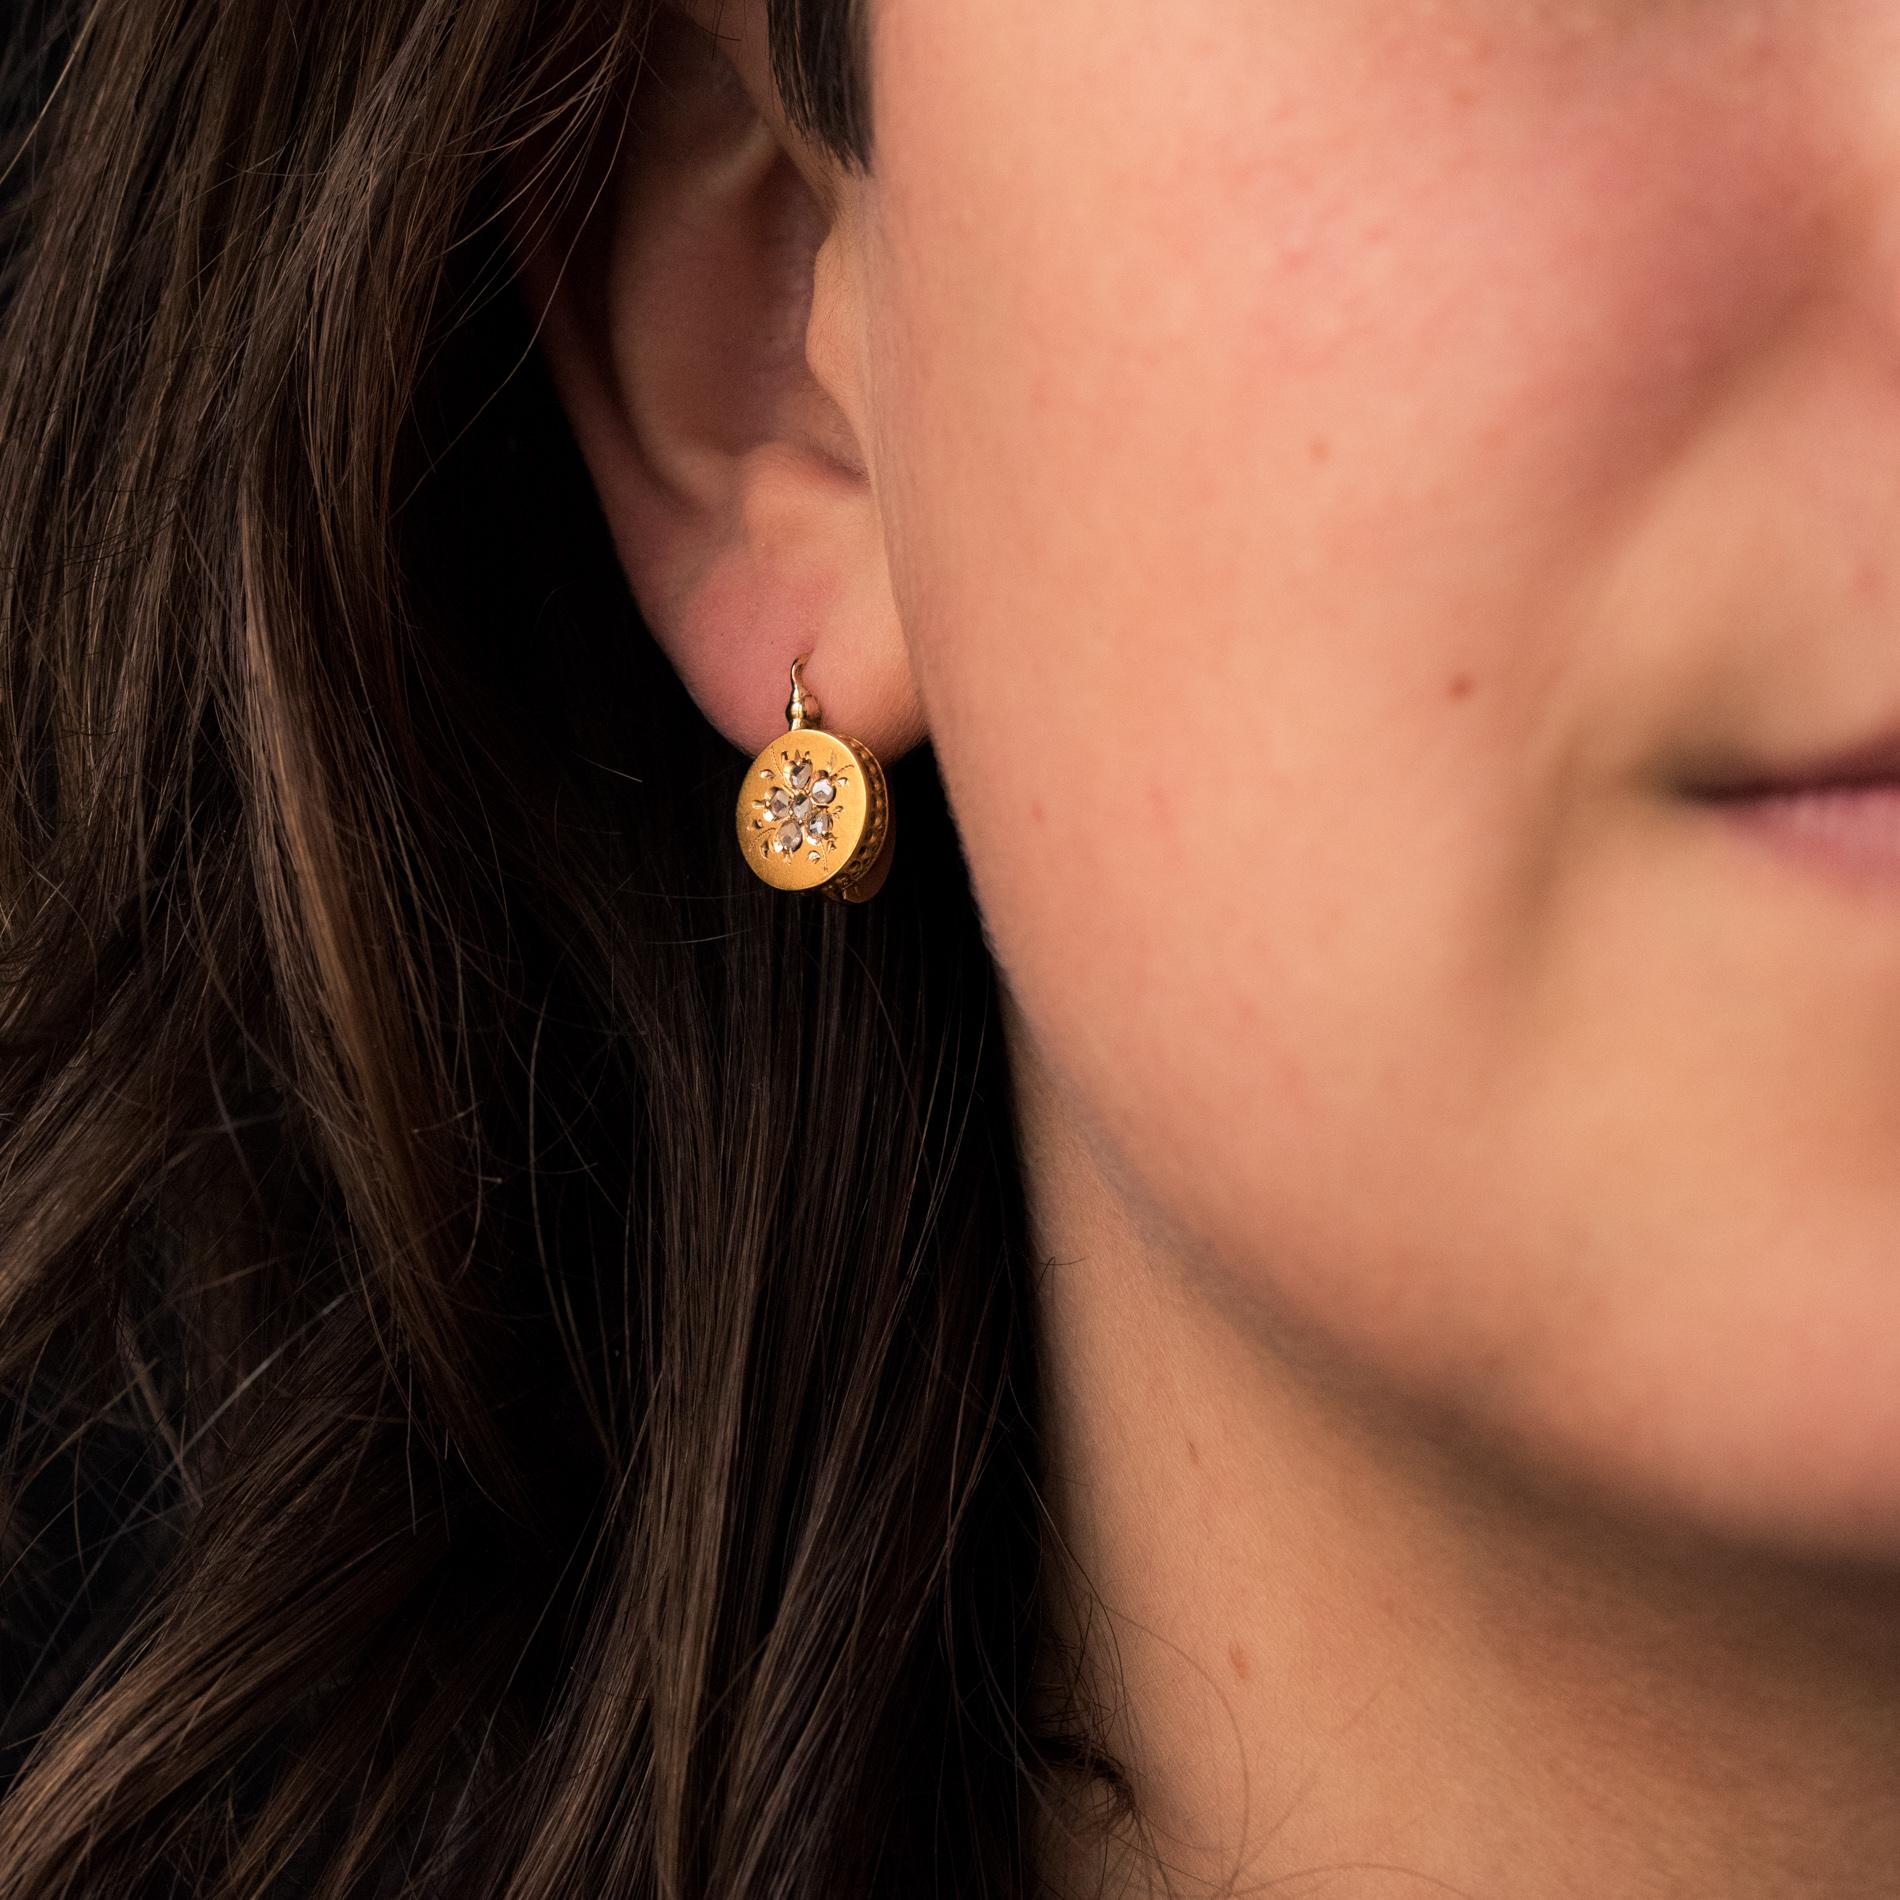 Earrings in 18 karat yellow gold, eagle's head hallmark.
Lovely antique drop earrings, each earring is made of a flat gold disc chiselled with a pansy flower, whose heart and petals are set with rose-cut diamonds. The clasp threads from the